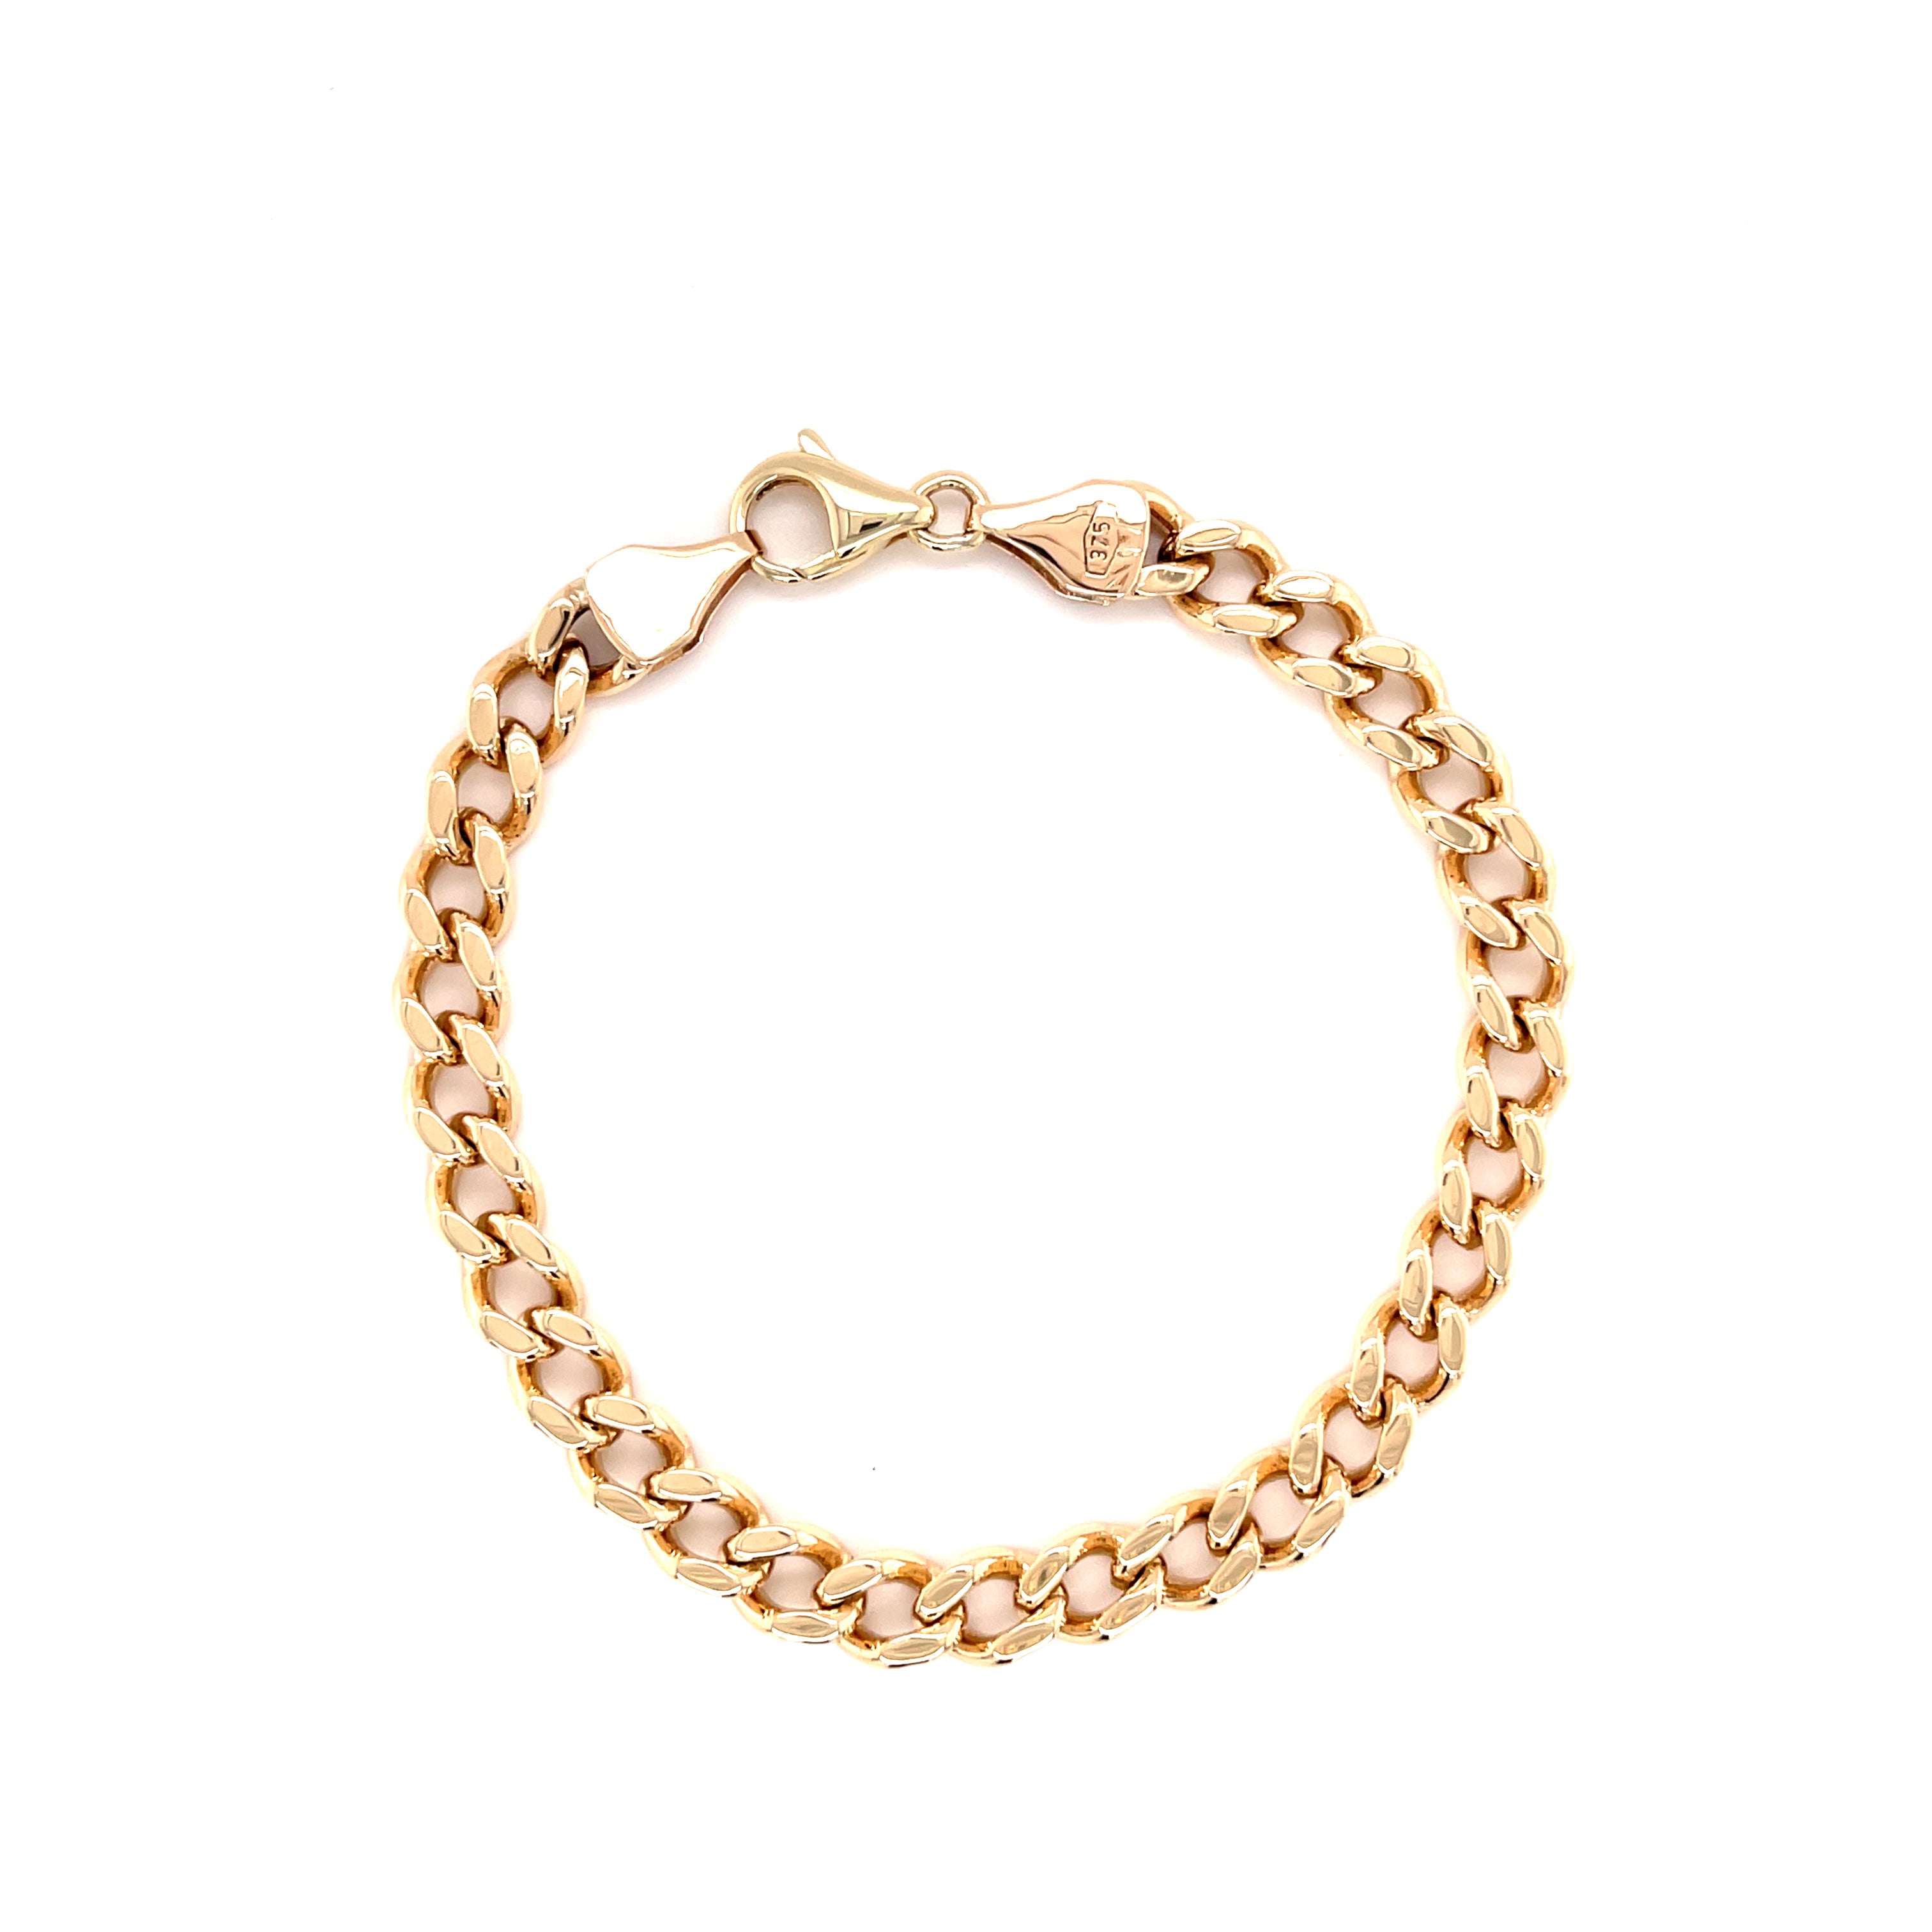 9ct Yellow Gold 8" Chunky Curb Link Bracelet - 22.04g